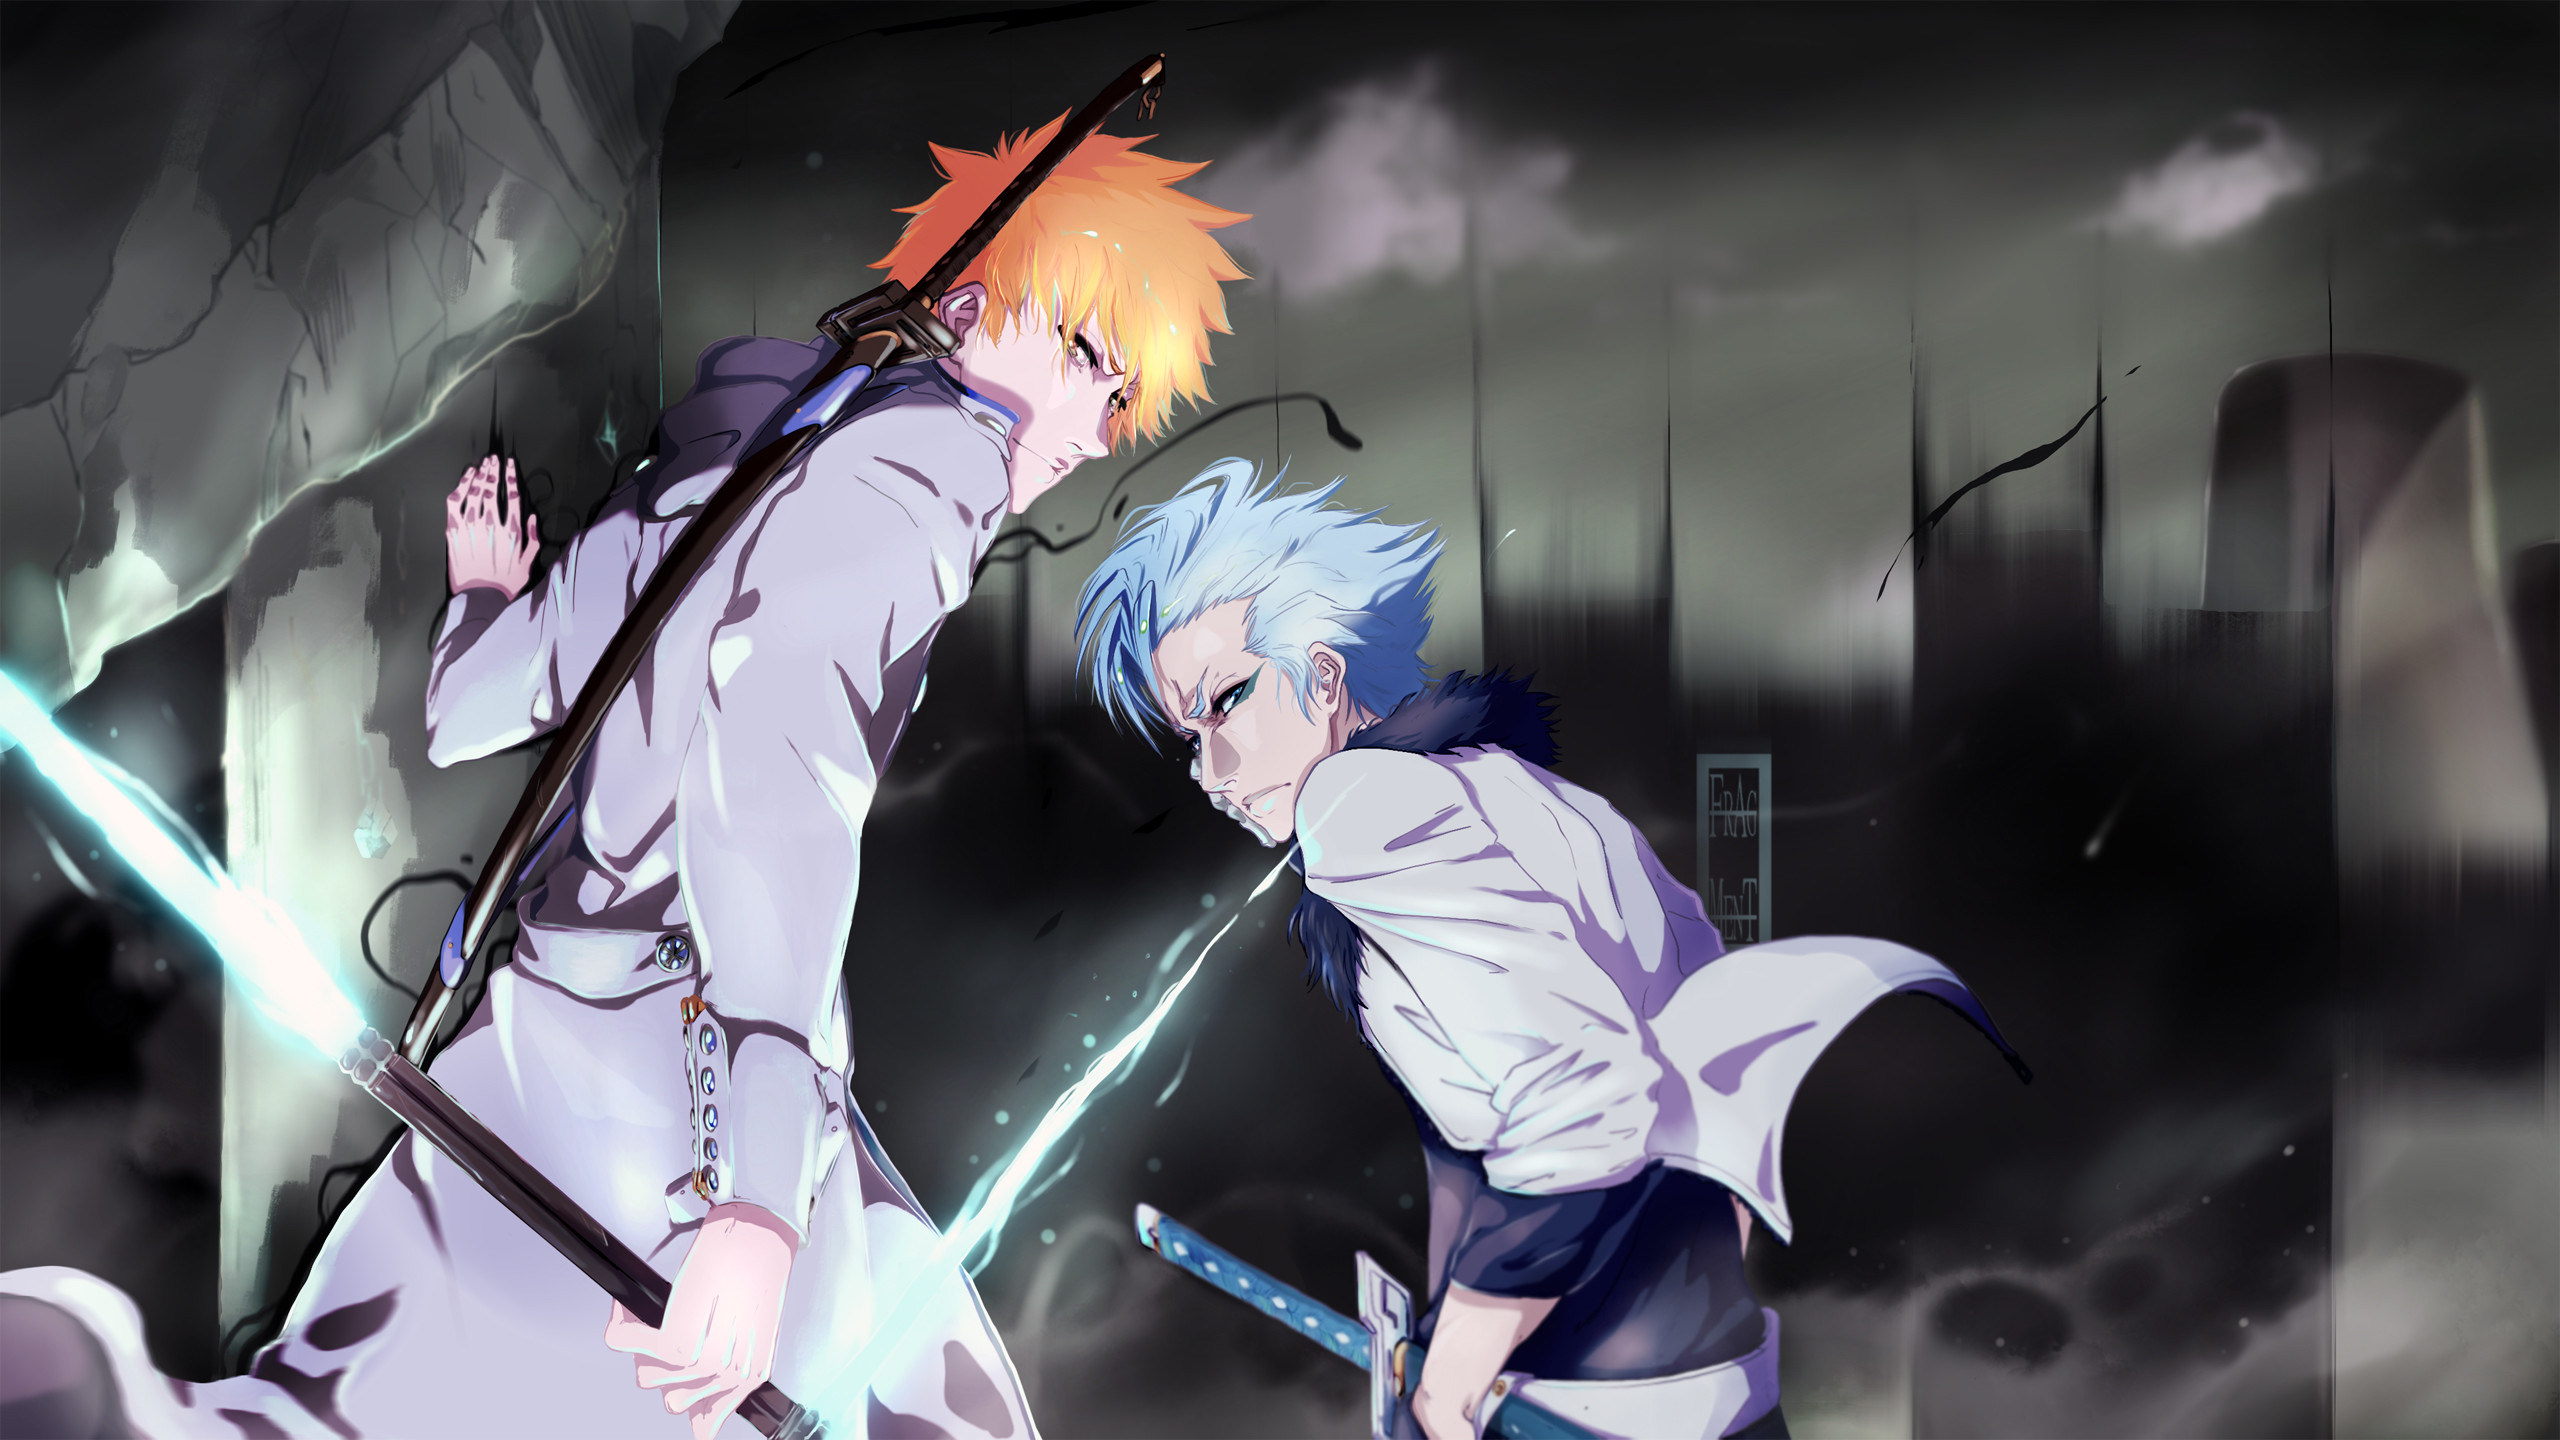 2560x1440 This amazing image of the duo of Ichigo and Grimmjow was done by  IFrAgMenTIx who has numerous amazing looking Bleach and other anime fan  art, ...